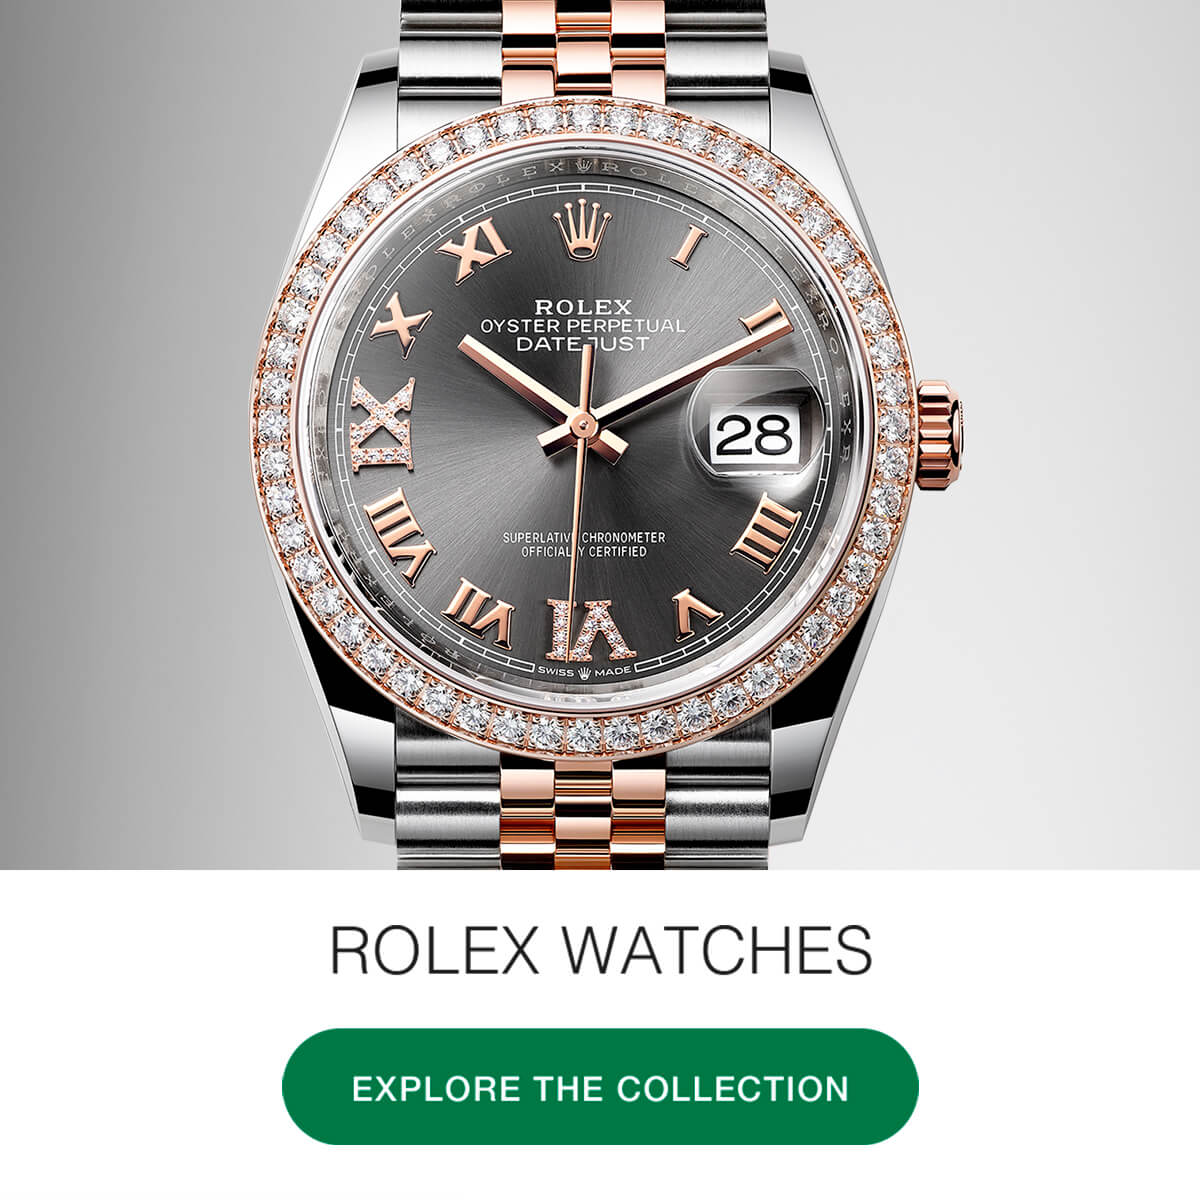 Shop Rolex Timepieces at an Official Authorized Rolex Jeweler in Maine and in Tax-Free New Hampshire